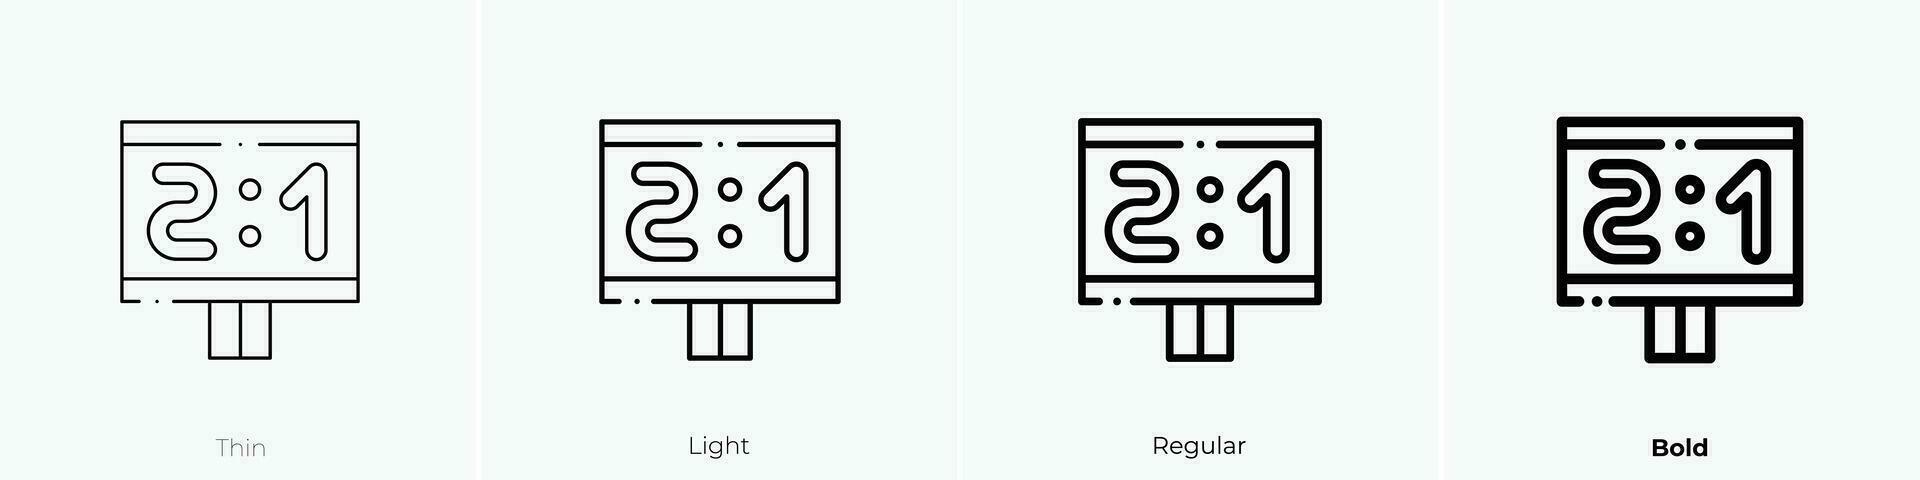 scoreboard icon. Thin, Light, Regular And Bold style design isolated on white background vector